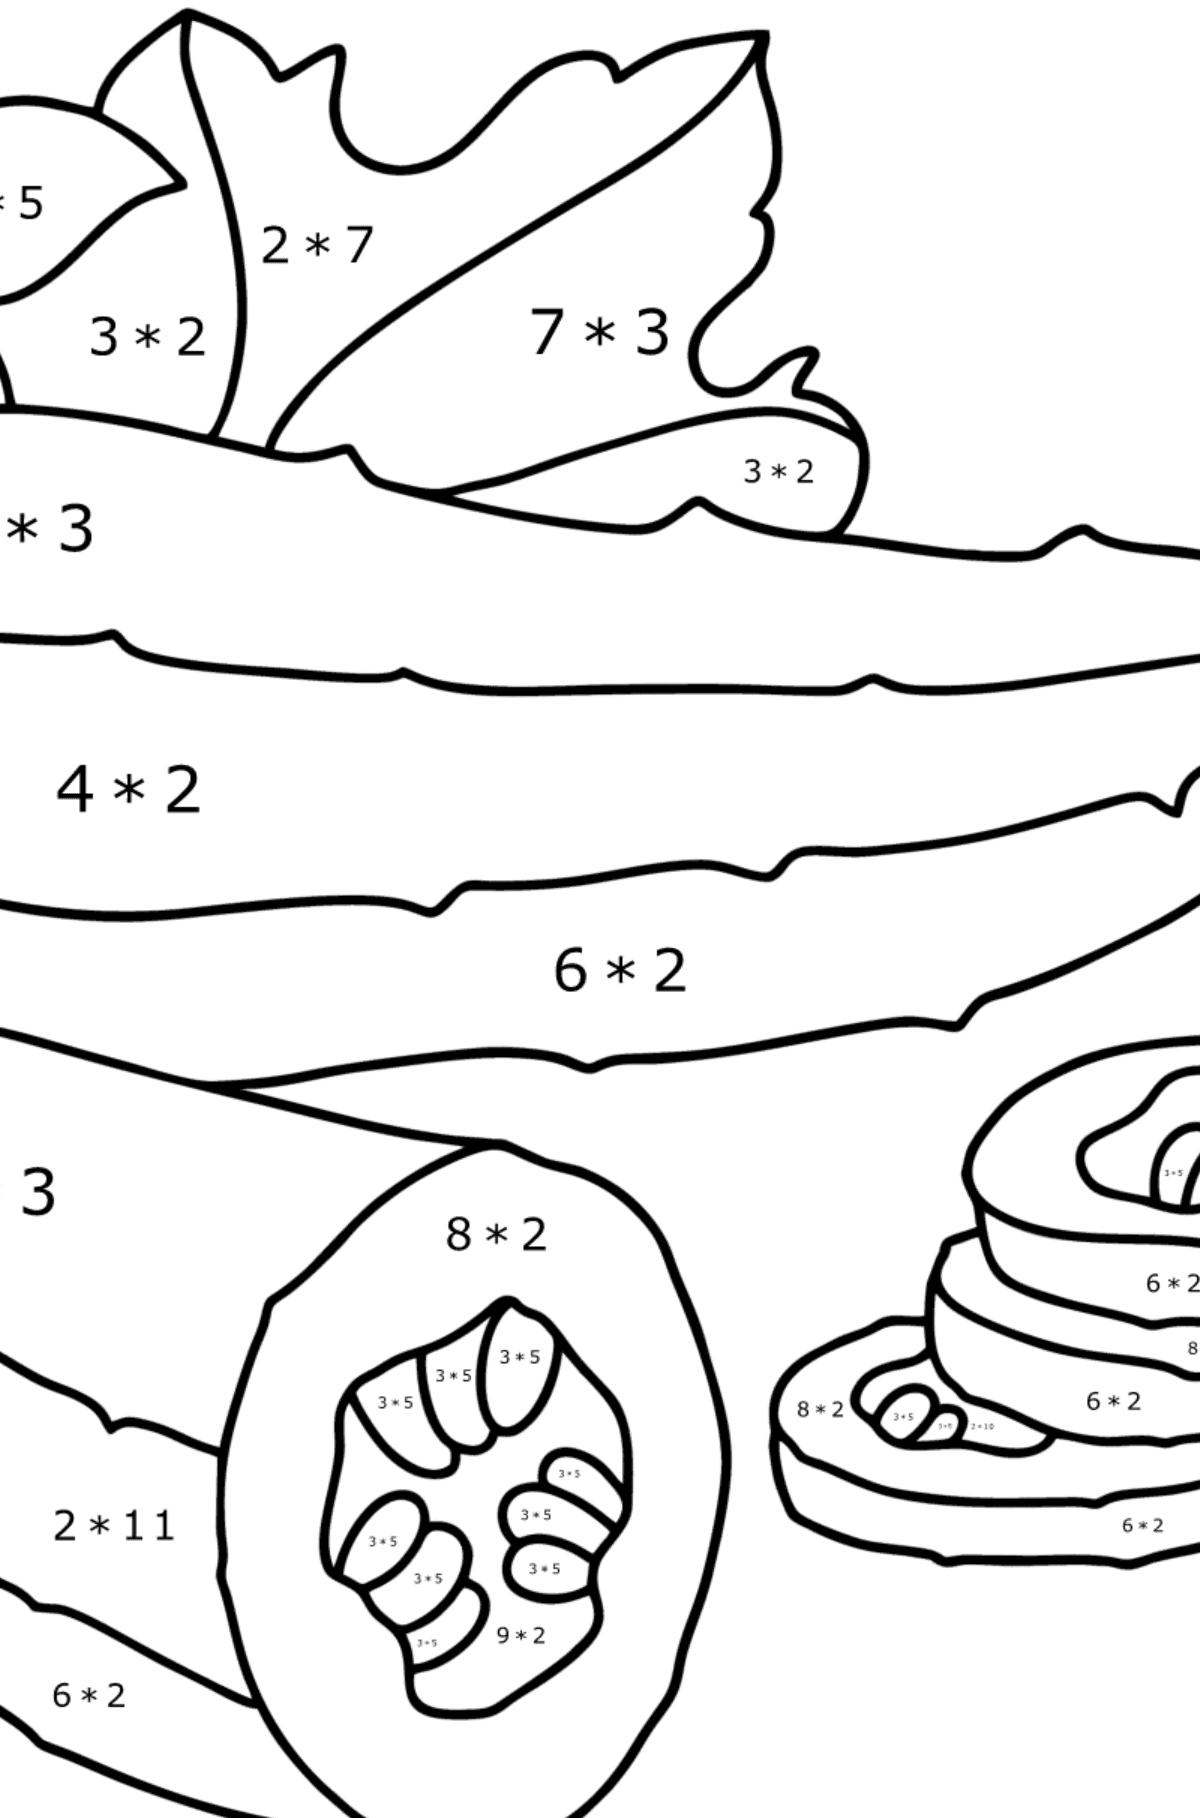 Fresh cucumbers сoloring page - Math Coloring - Multiplication for Kids